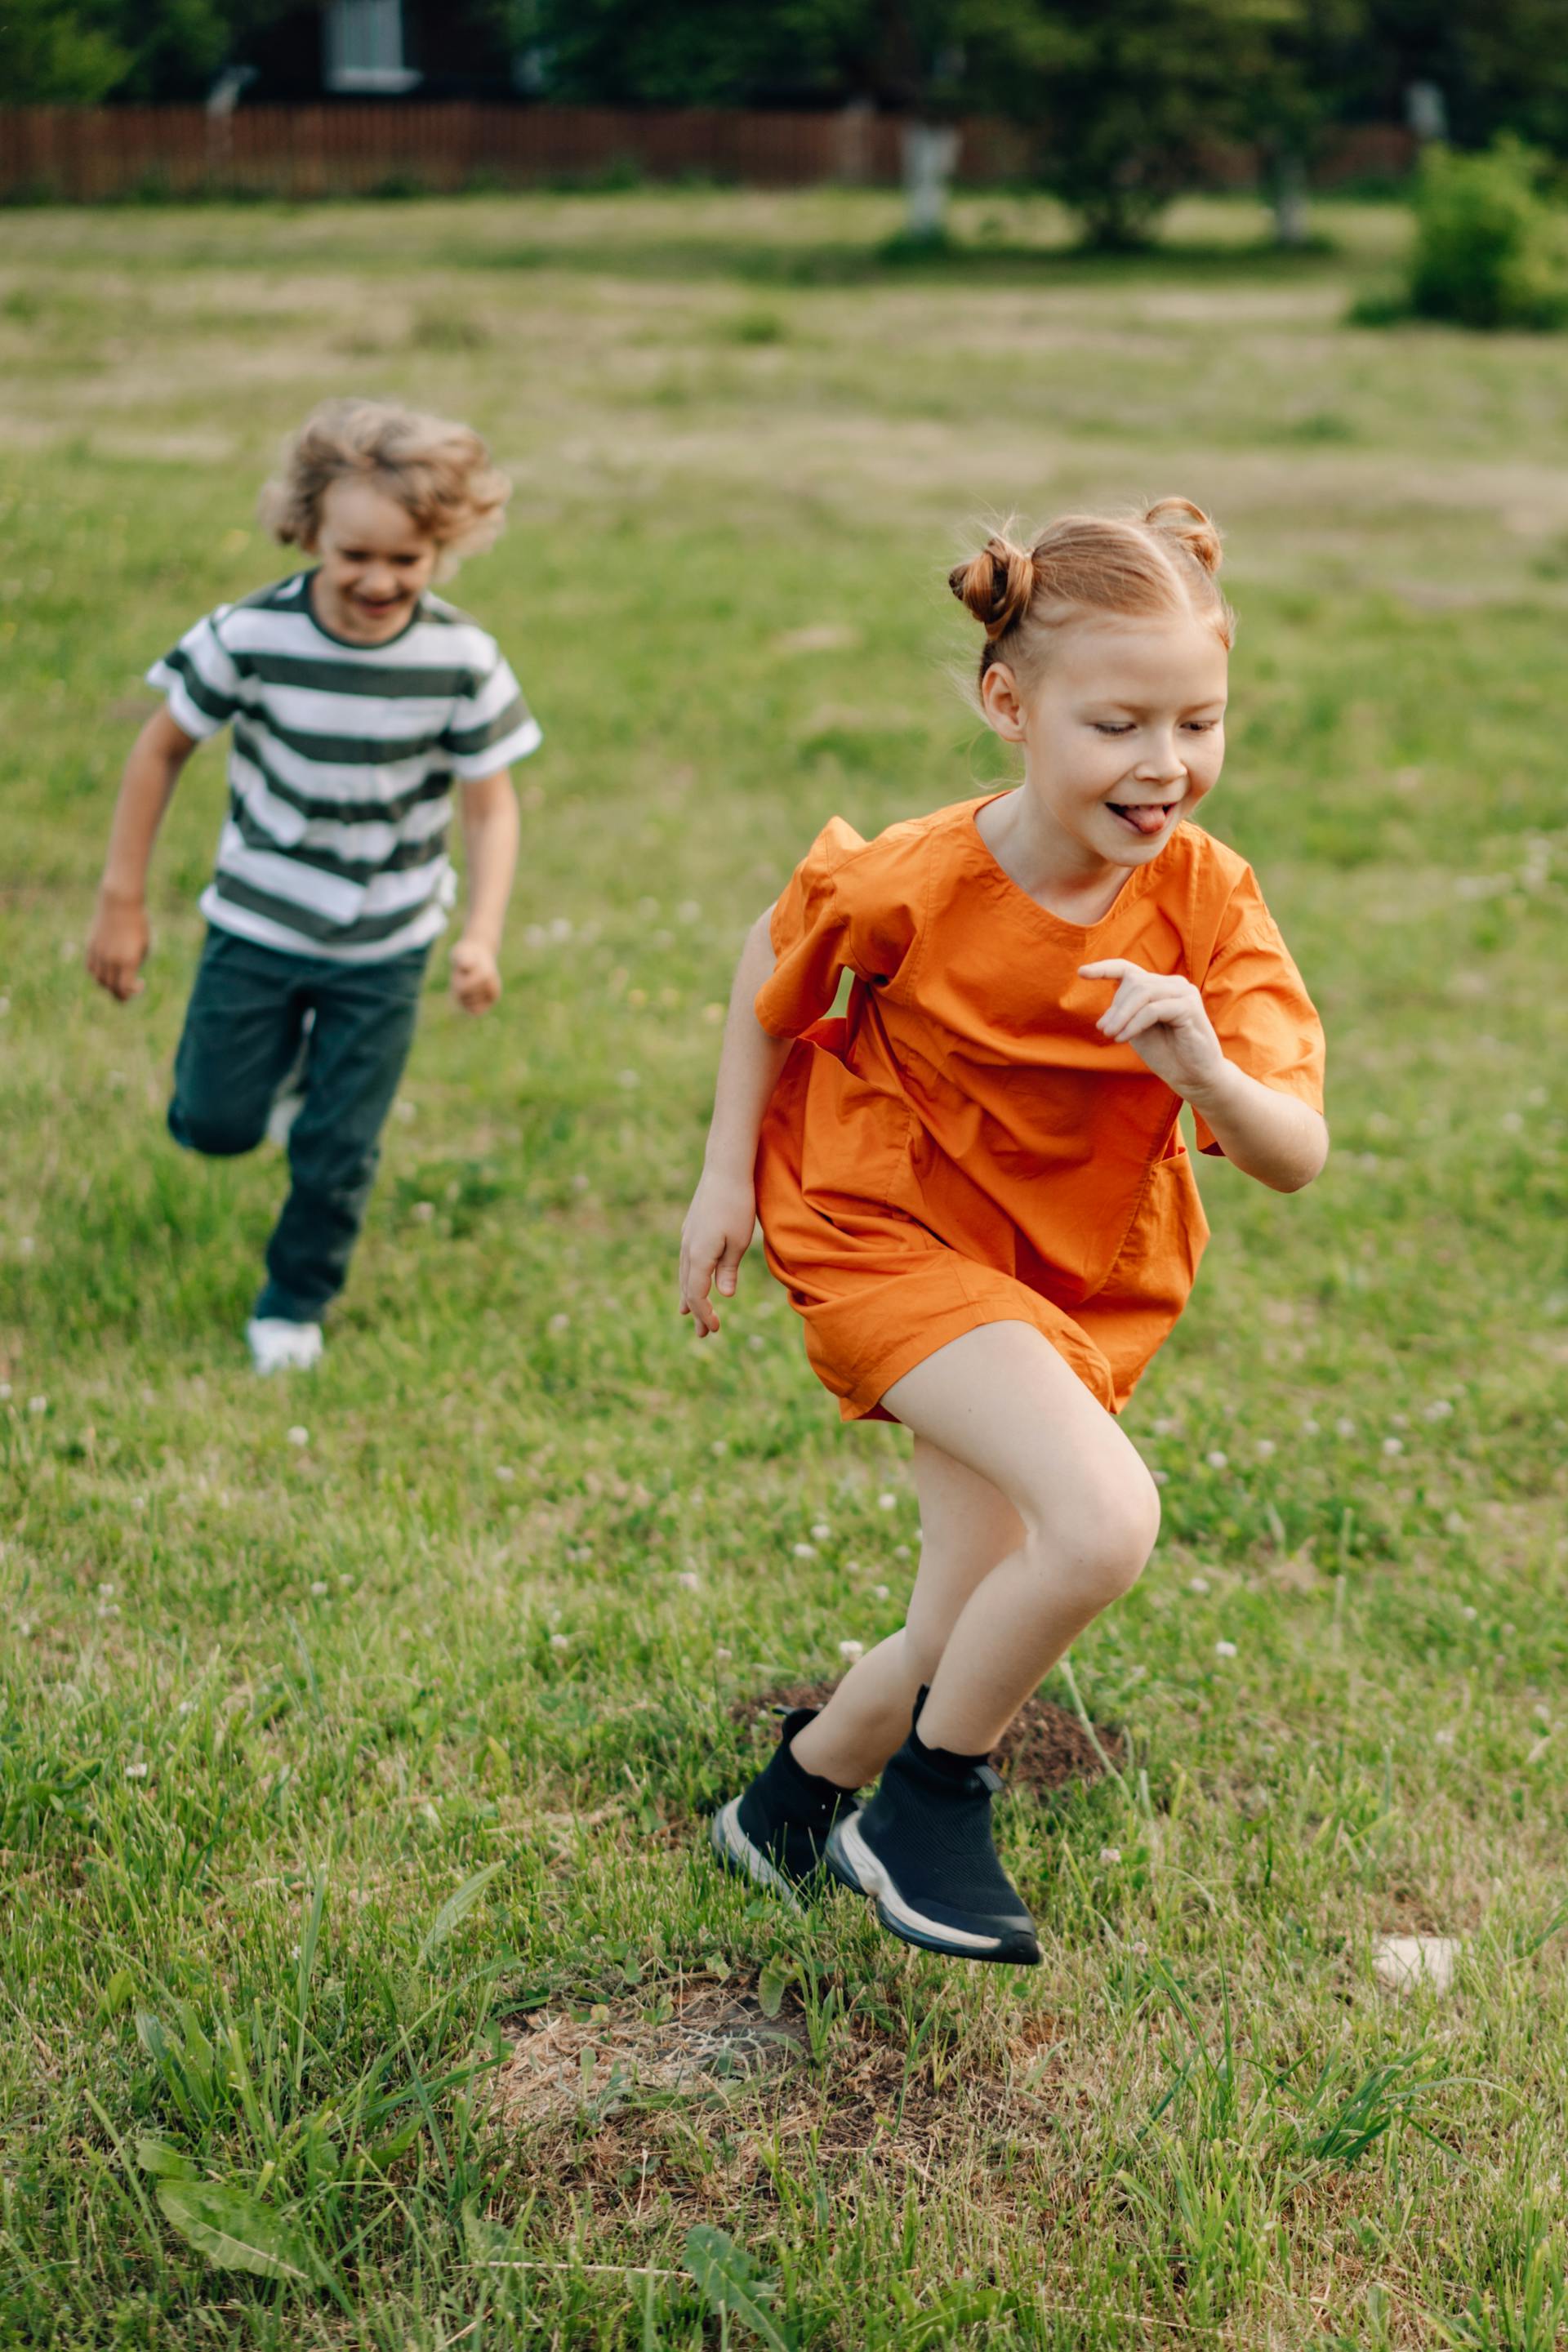 Boy and girl running on grass | Source: Pexels